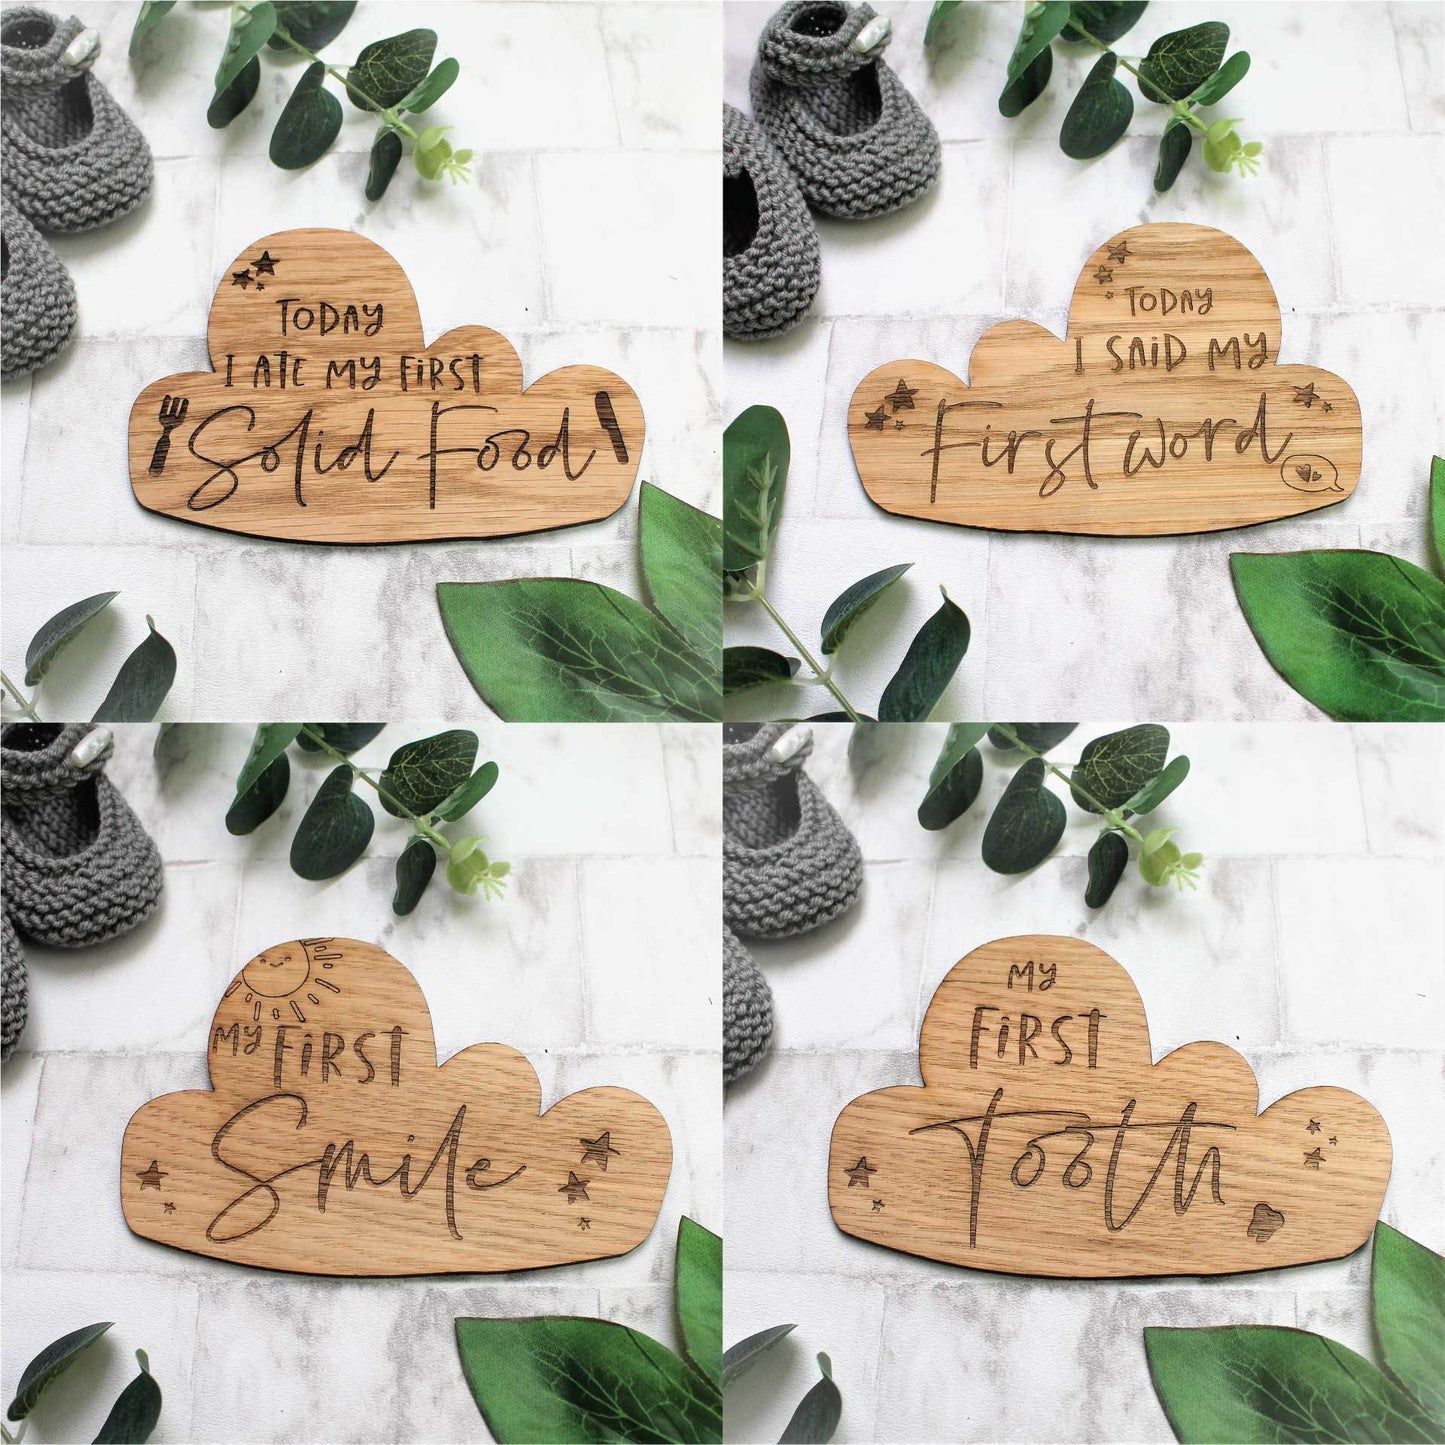 baby milestone / moments wooden engraved baby shower gifts, my first tooth, my first smile